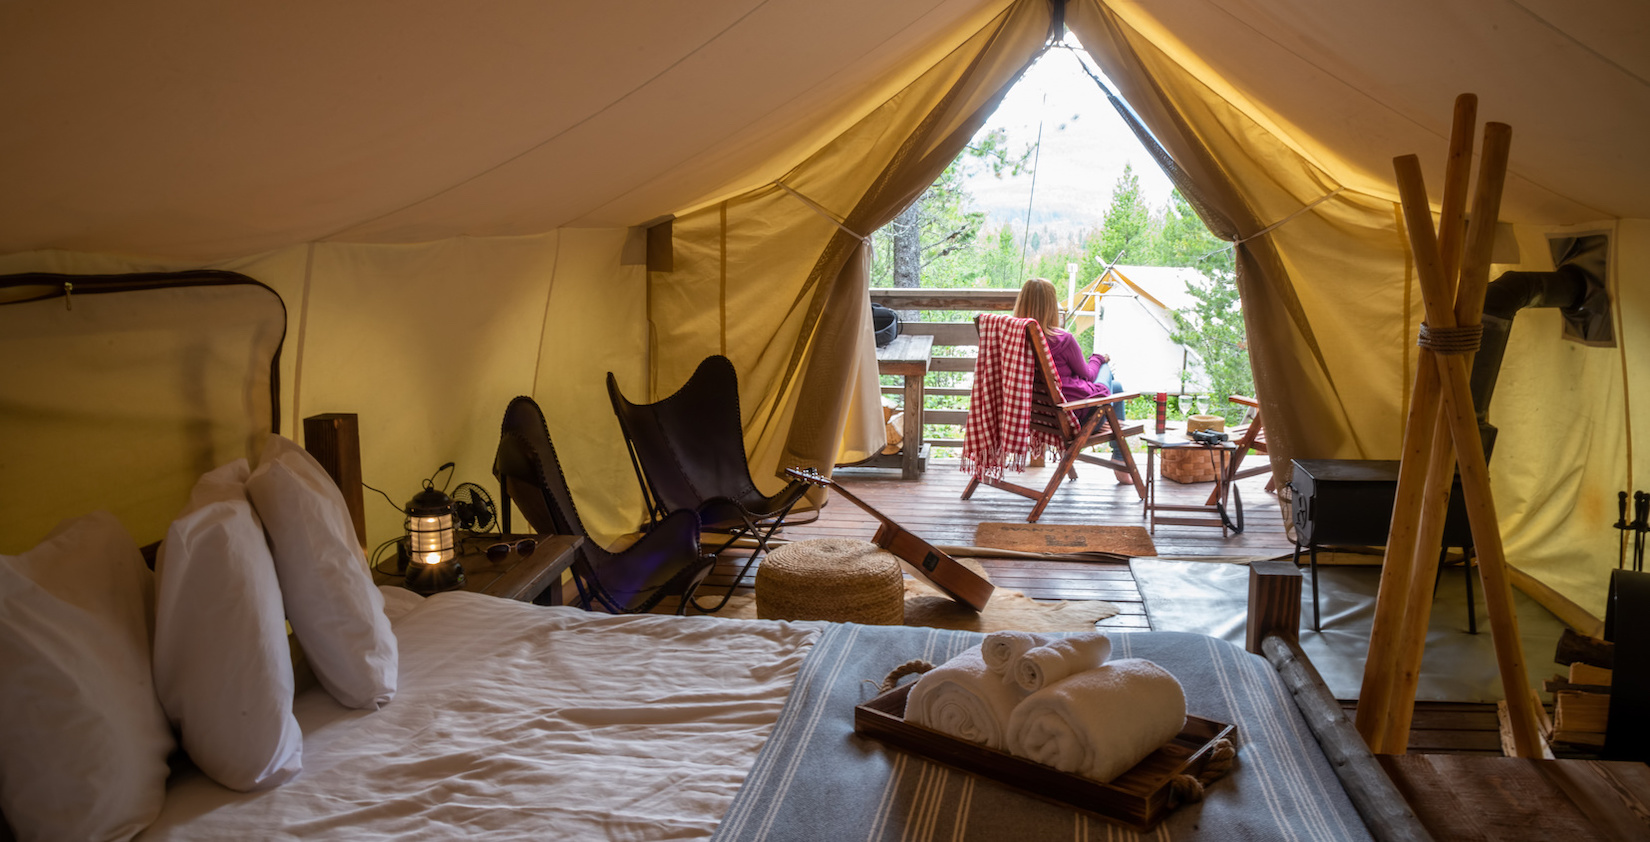 Inside of glamping tent